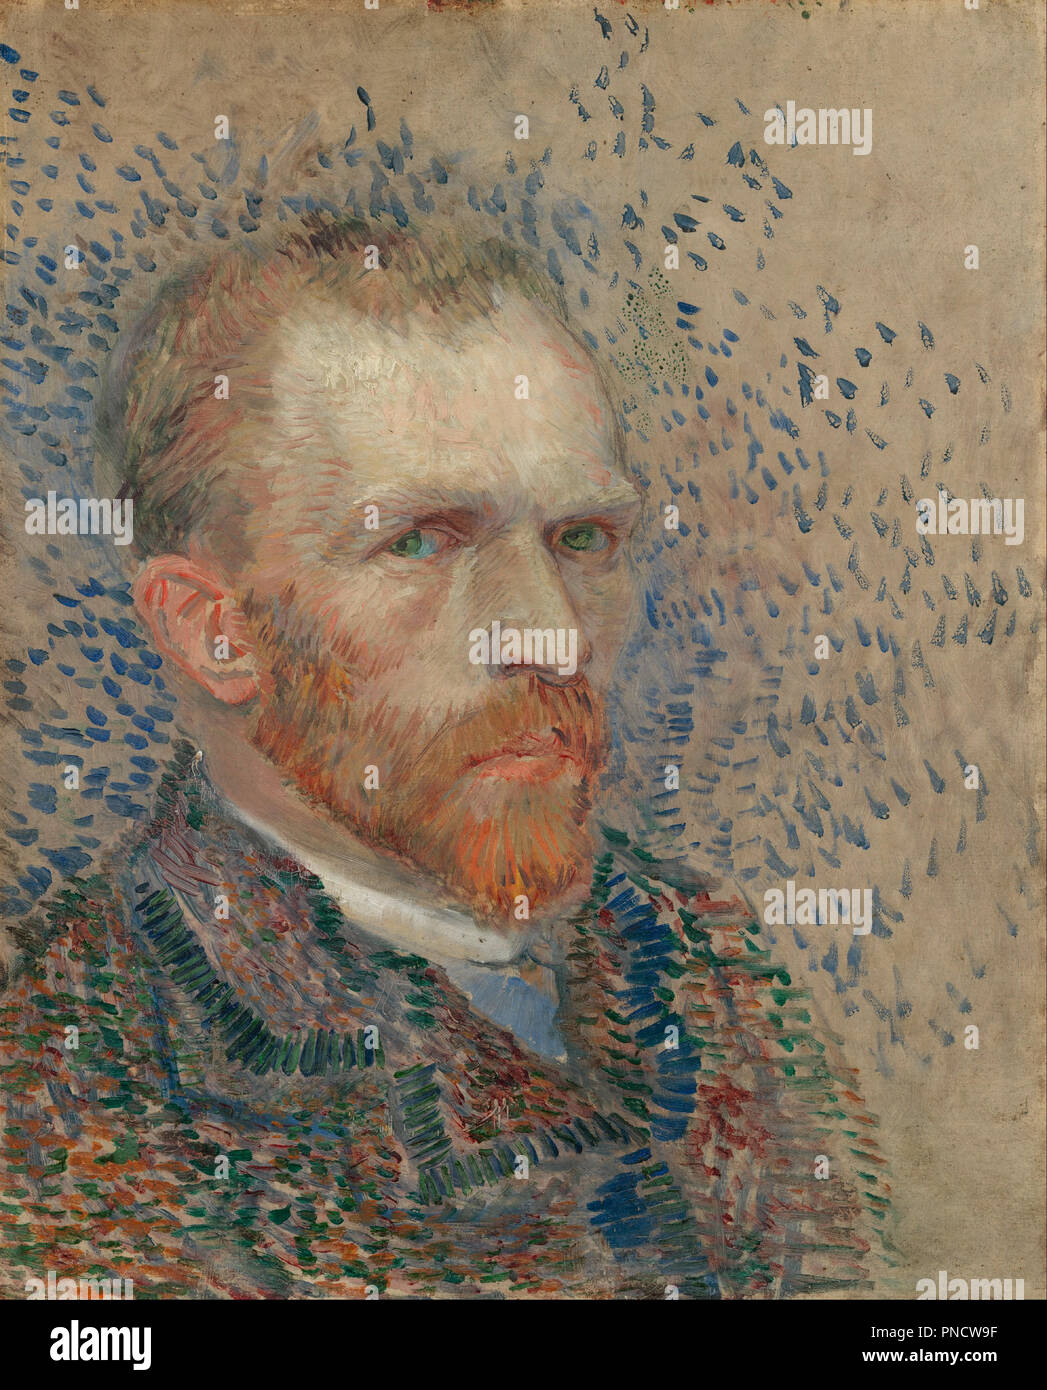 Self-portrait. Date/Period: 1887-03/1887-06. Painting. Oil on pasteboard. Height: 41 cm (16.1 in); Width: 33 cm (12.9 in). Author: VINCENT VAN GOGH. Stock Photo